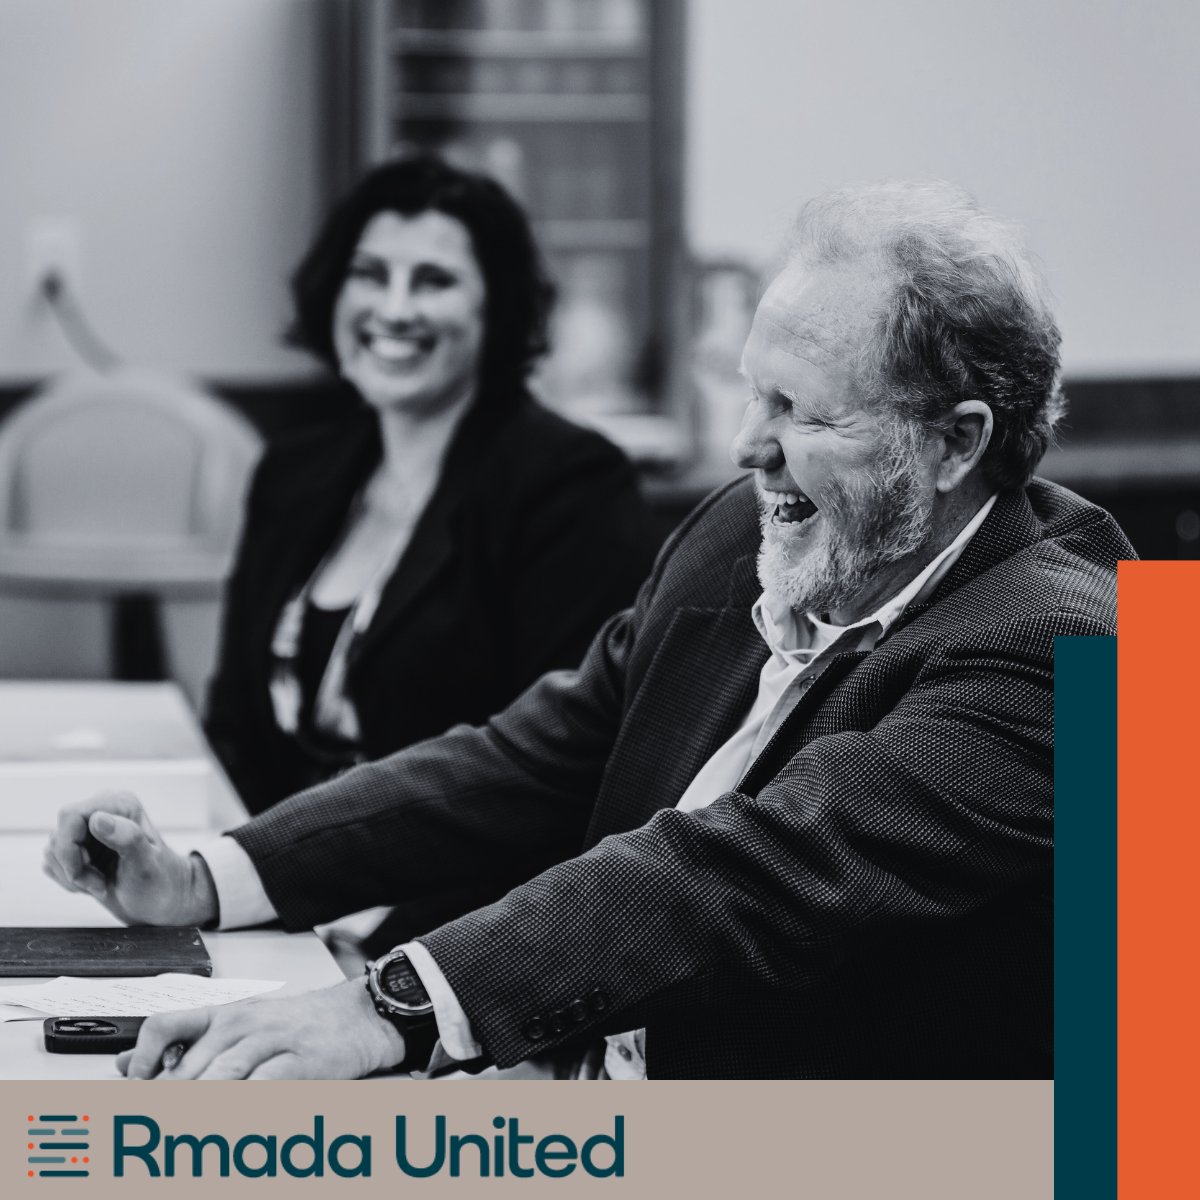 Phase two of our in-person signature development program runs from April 22-25. Stop in to see what developing your leaders would look like! 

Contact Sabreena for your visit: SabreenaK@RmadaUnited.com

#LeadershipDevelopment #Better #NextSteps #Rmada